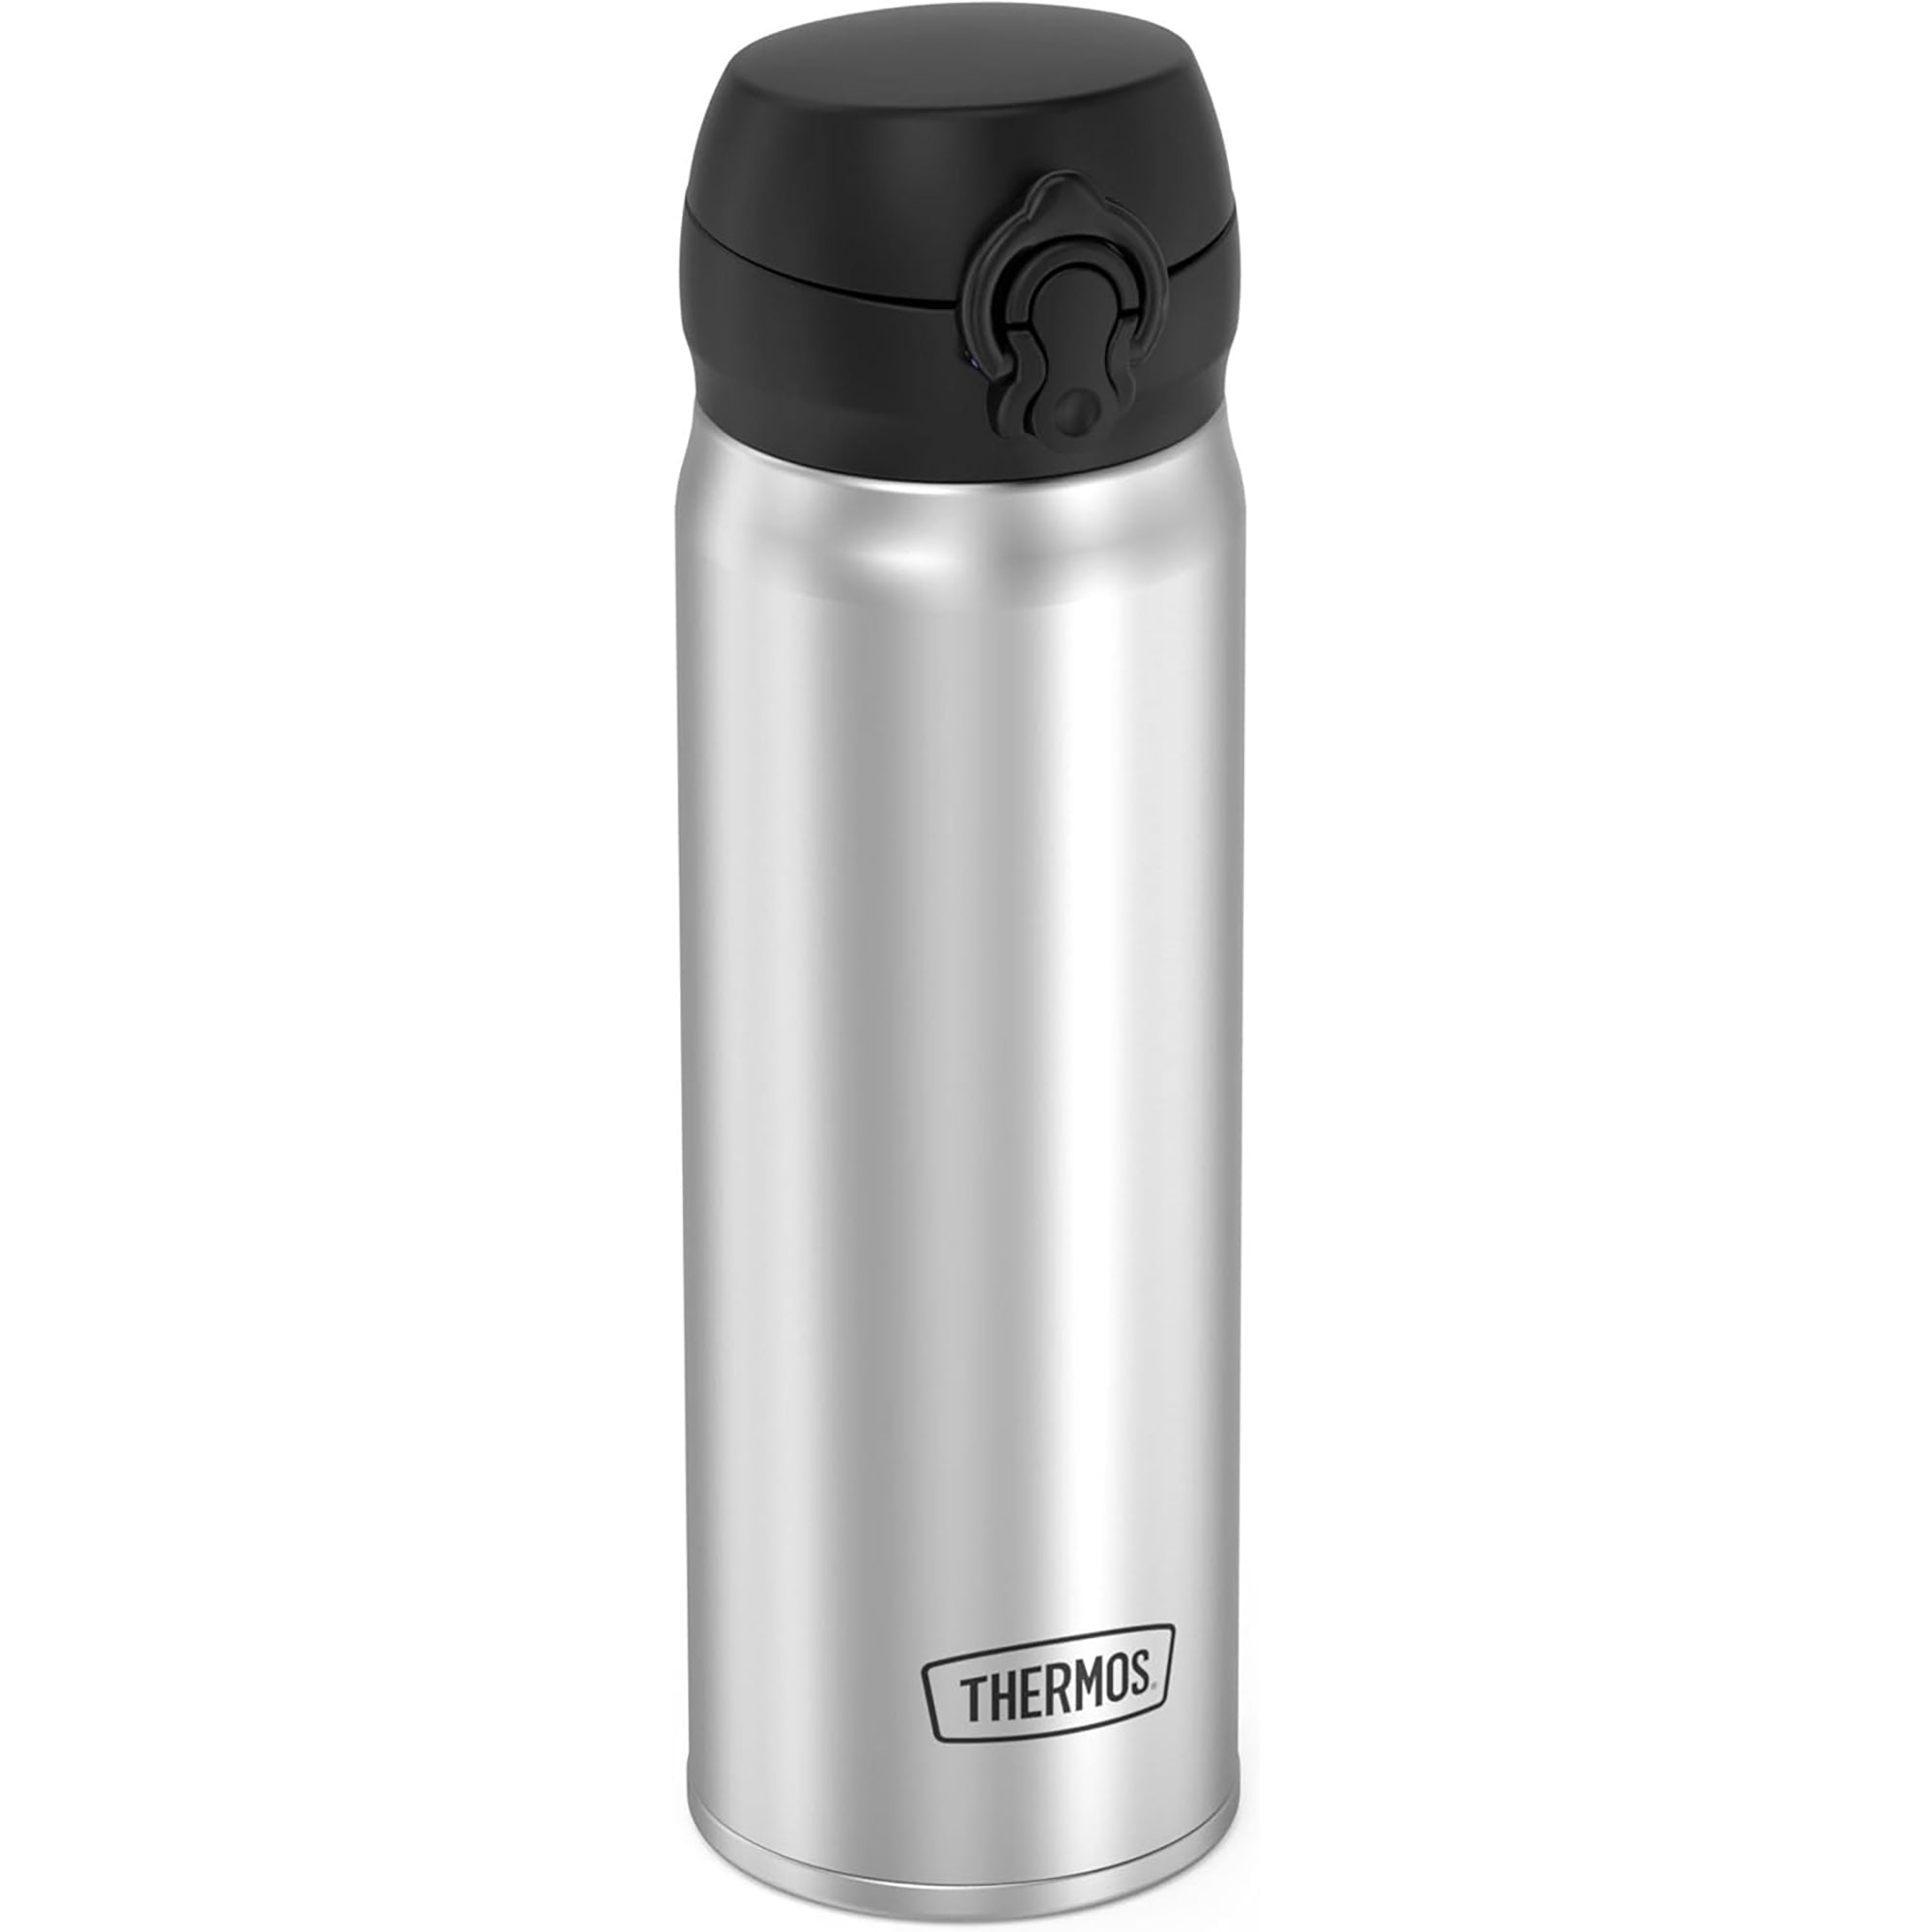 Thermos 16 oz. Vacuum Insulated Stainless Steel Direct Drink Bottle Thermos